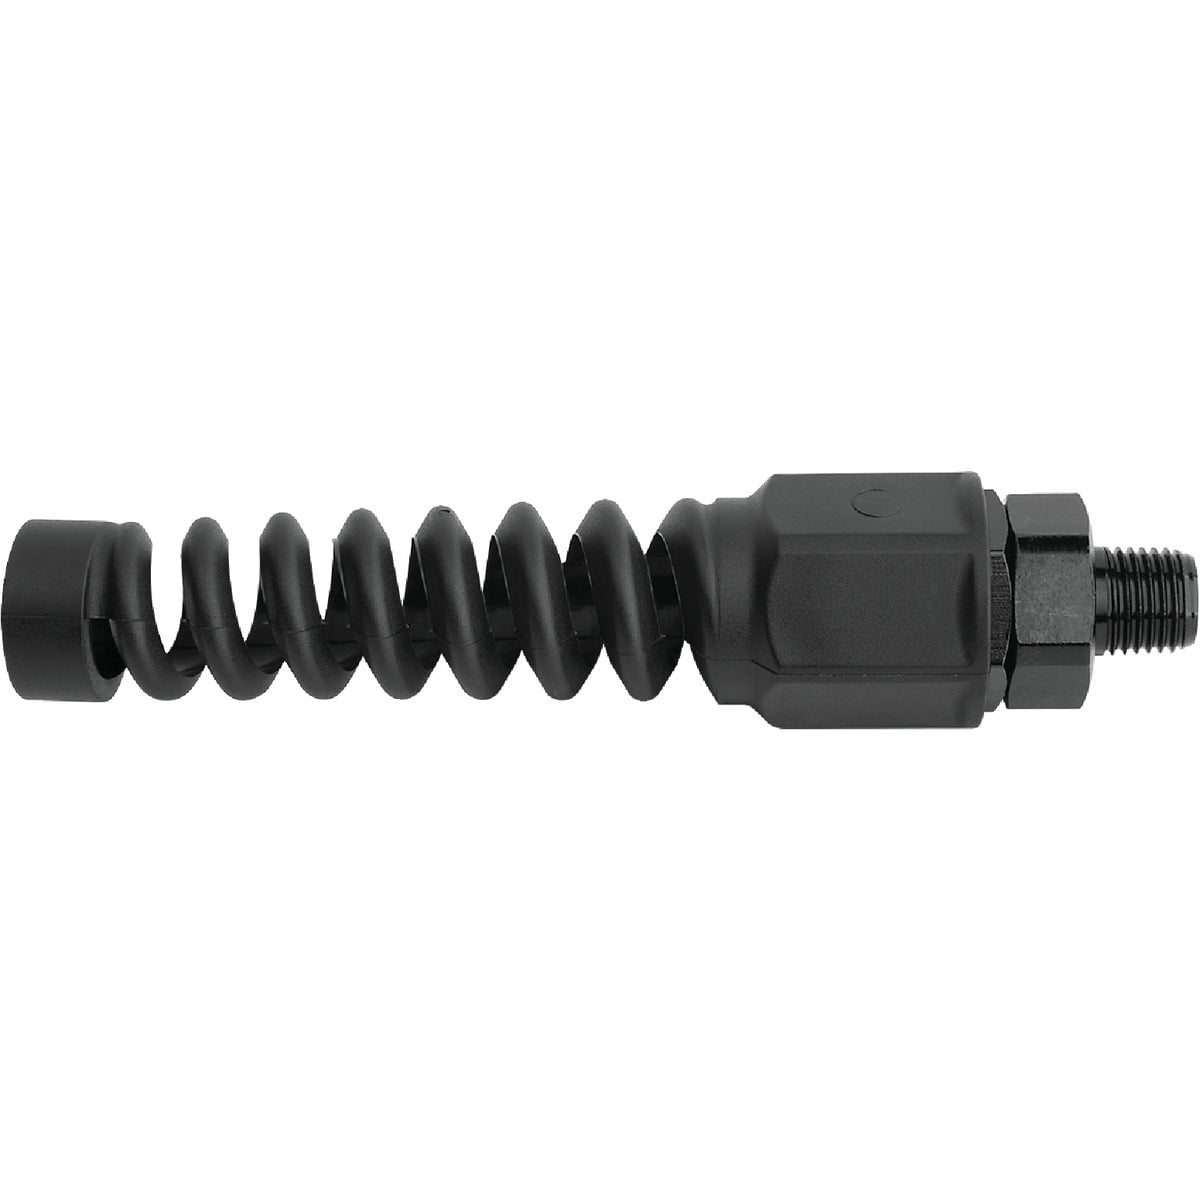 RP900250 1/4 in Flexzilla Pro Air Hose Reusable Fitting 